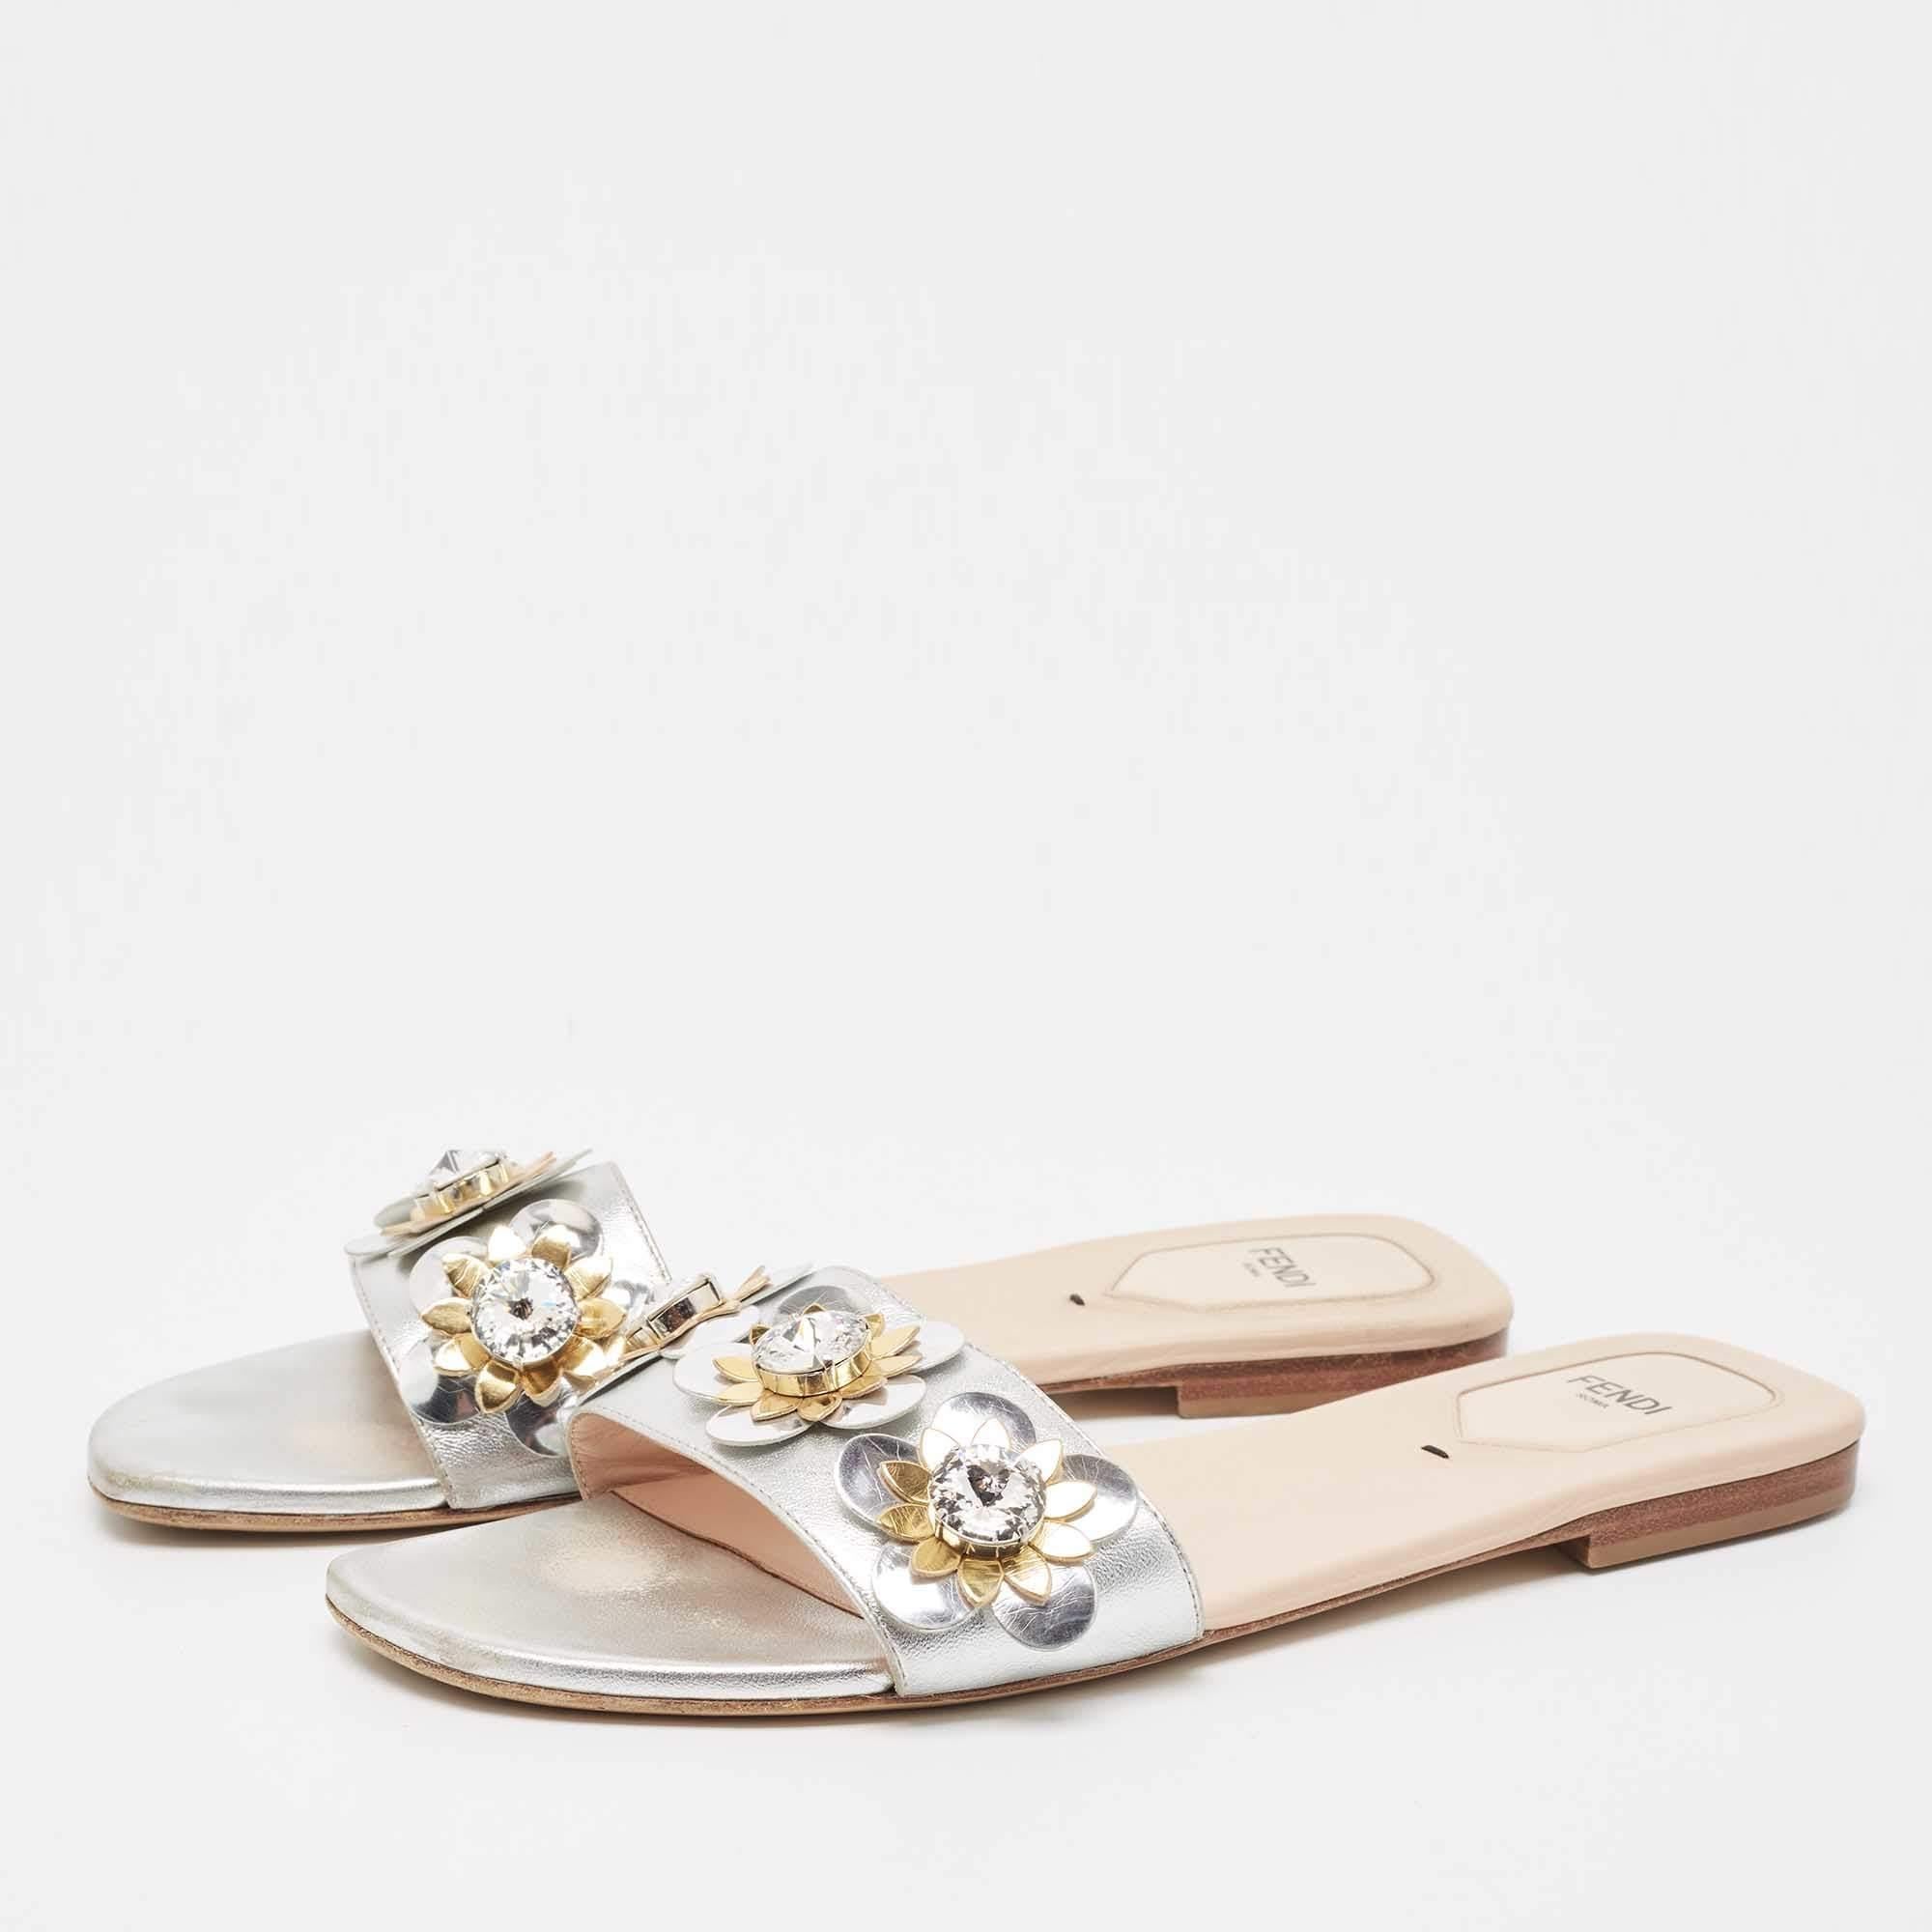 Frame your feet with these Fendi flat slides in silver. Created using the best materials, the flats are perfect with short, midi, and maxi hemlines.

